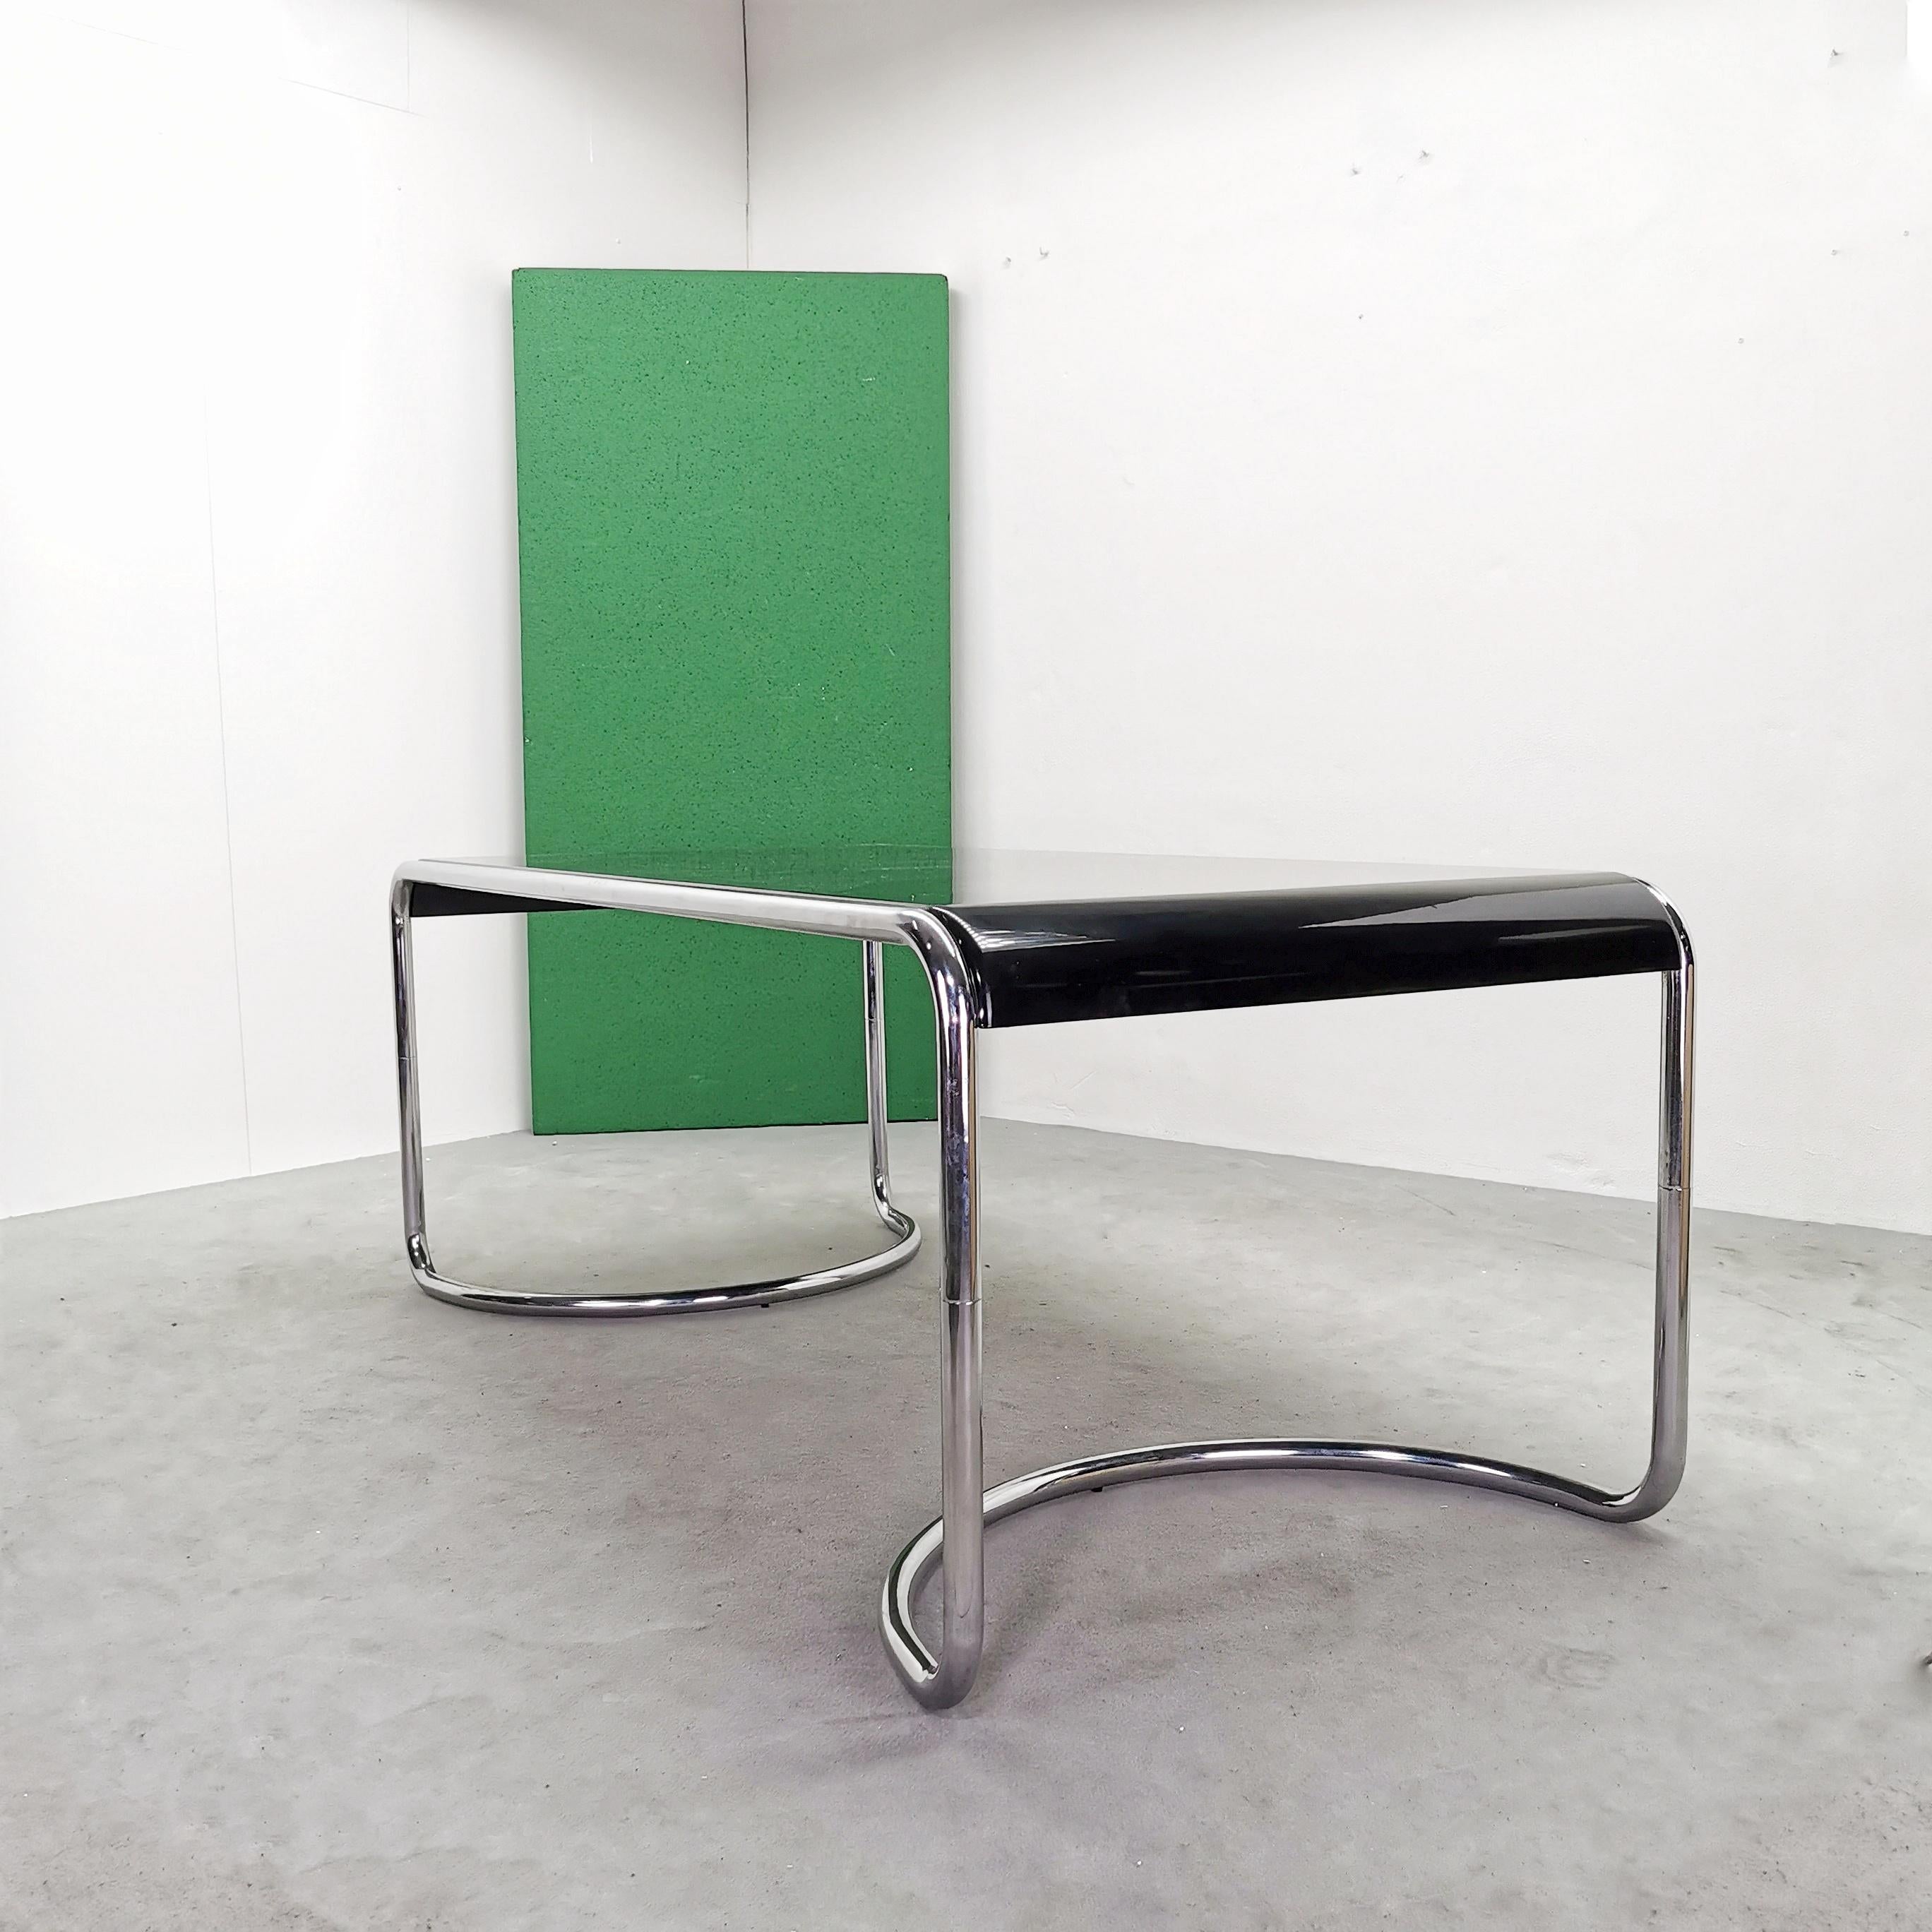 Rare Desk Table model Febo designed in 1970 by G. Stoppino for Driade. Chrome-plated tubular frame and lacquered curved wooden top. 
The table is in very good condition
the chrome structure has no defects
the plane shows some superficial signs of